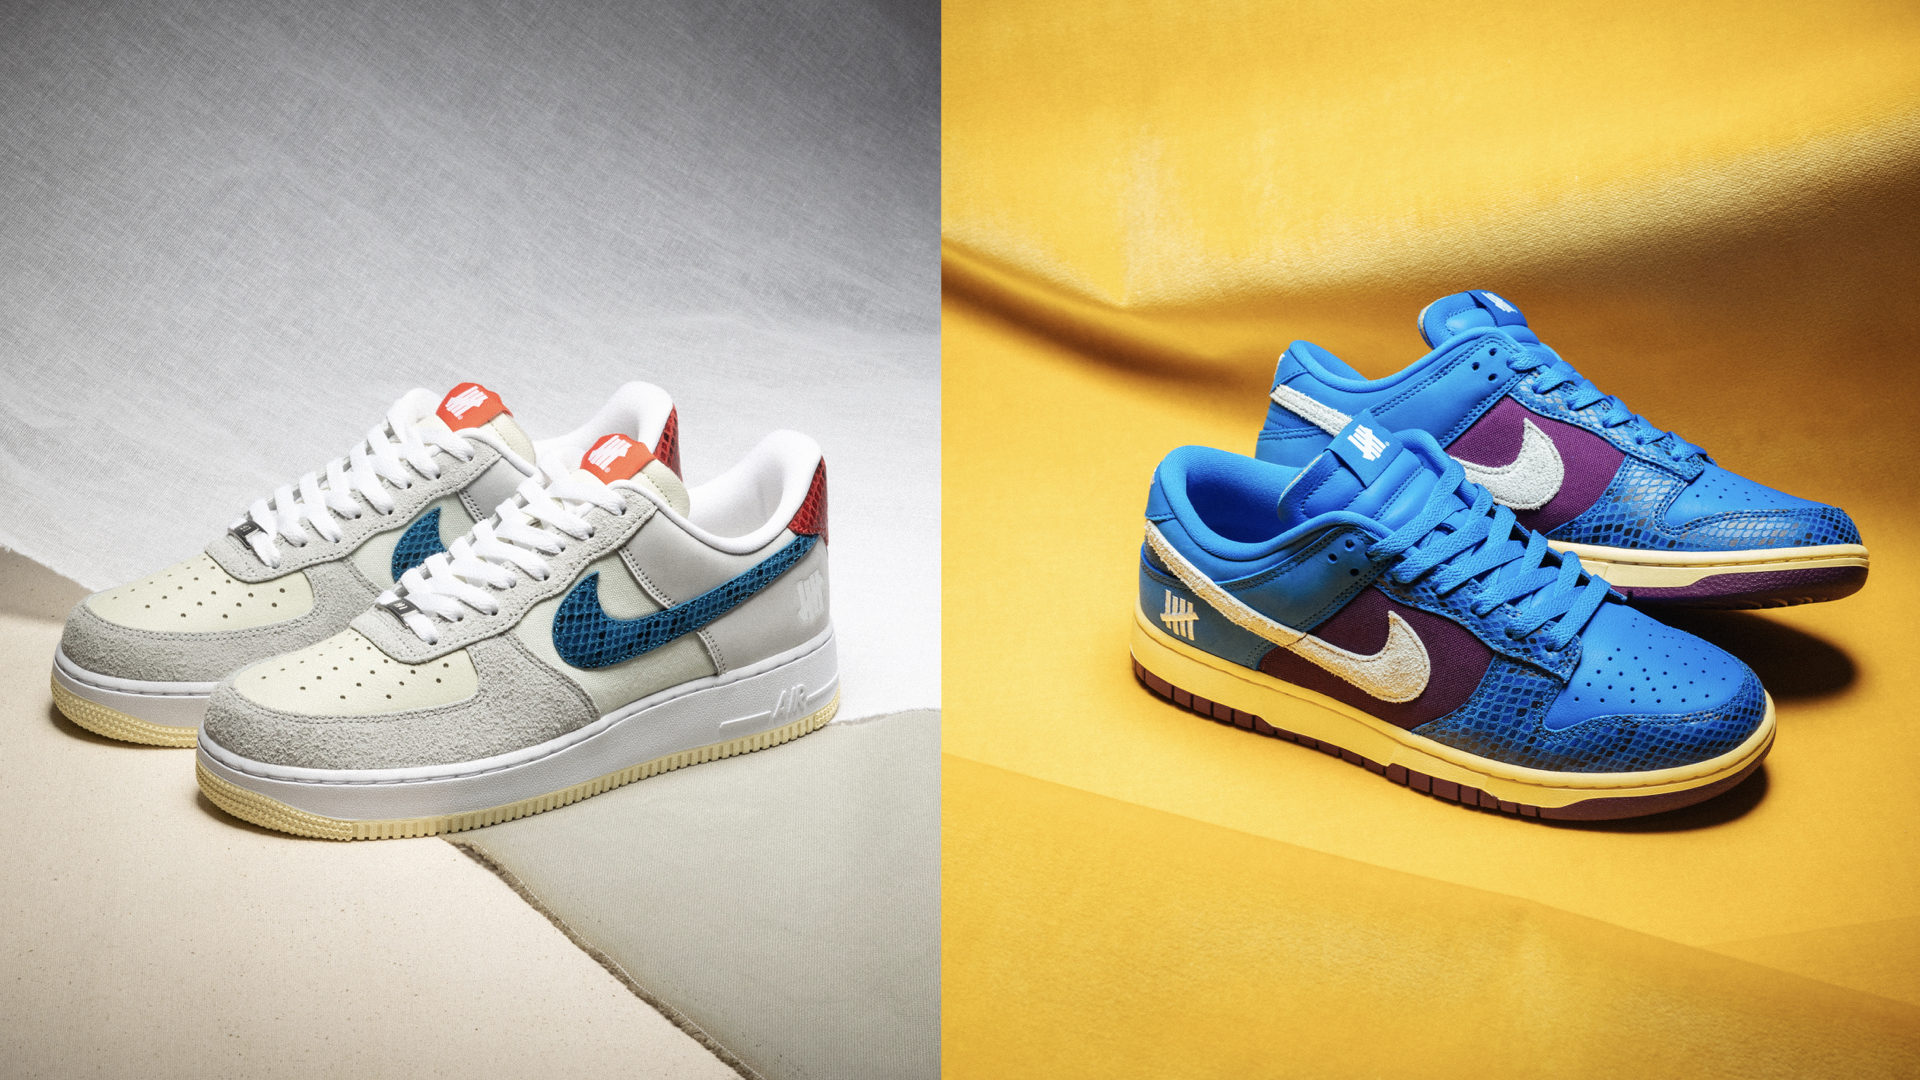 UNDEFEATED x NIKE DUNK VS AF1「5 ON IT」系列即将推出